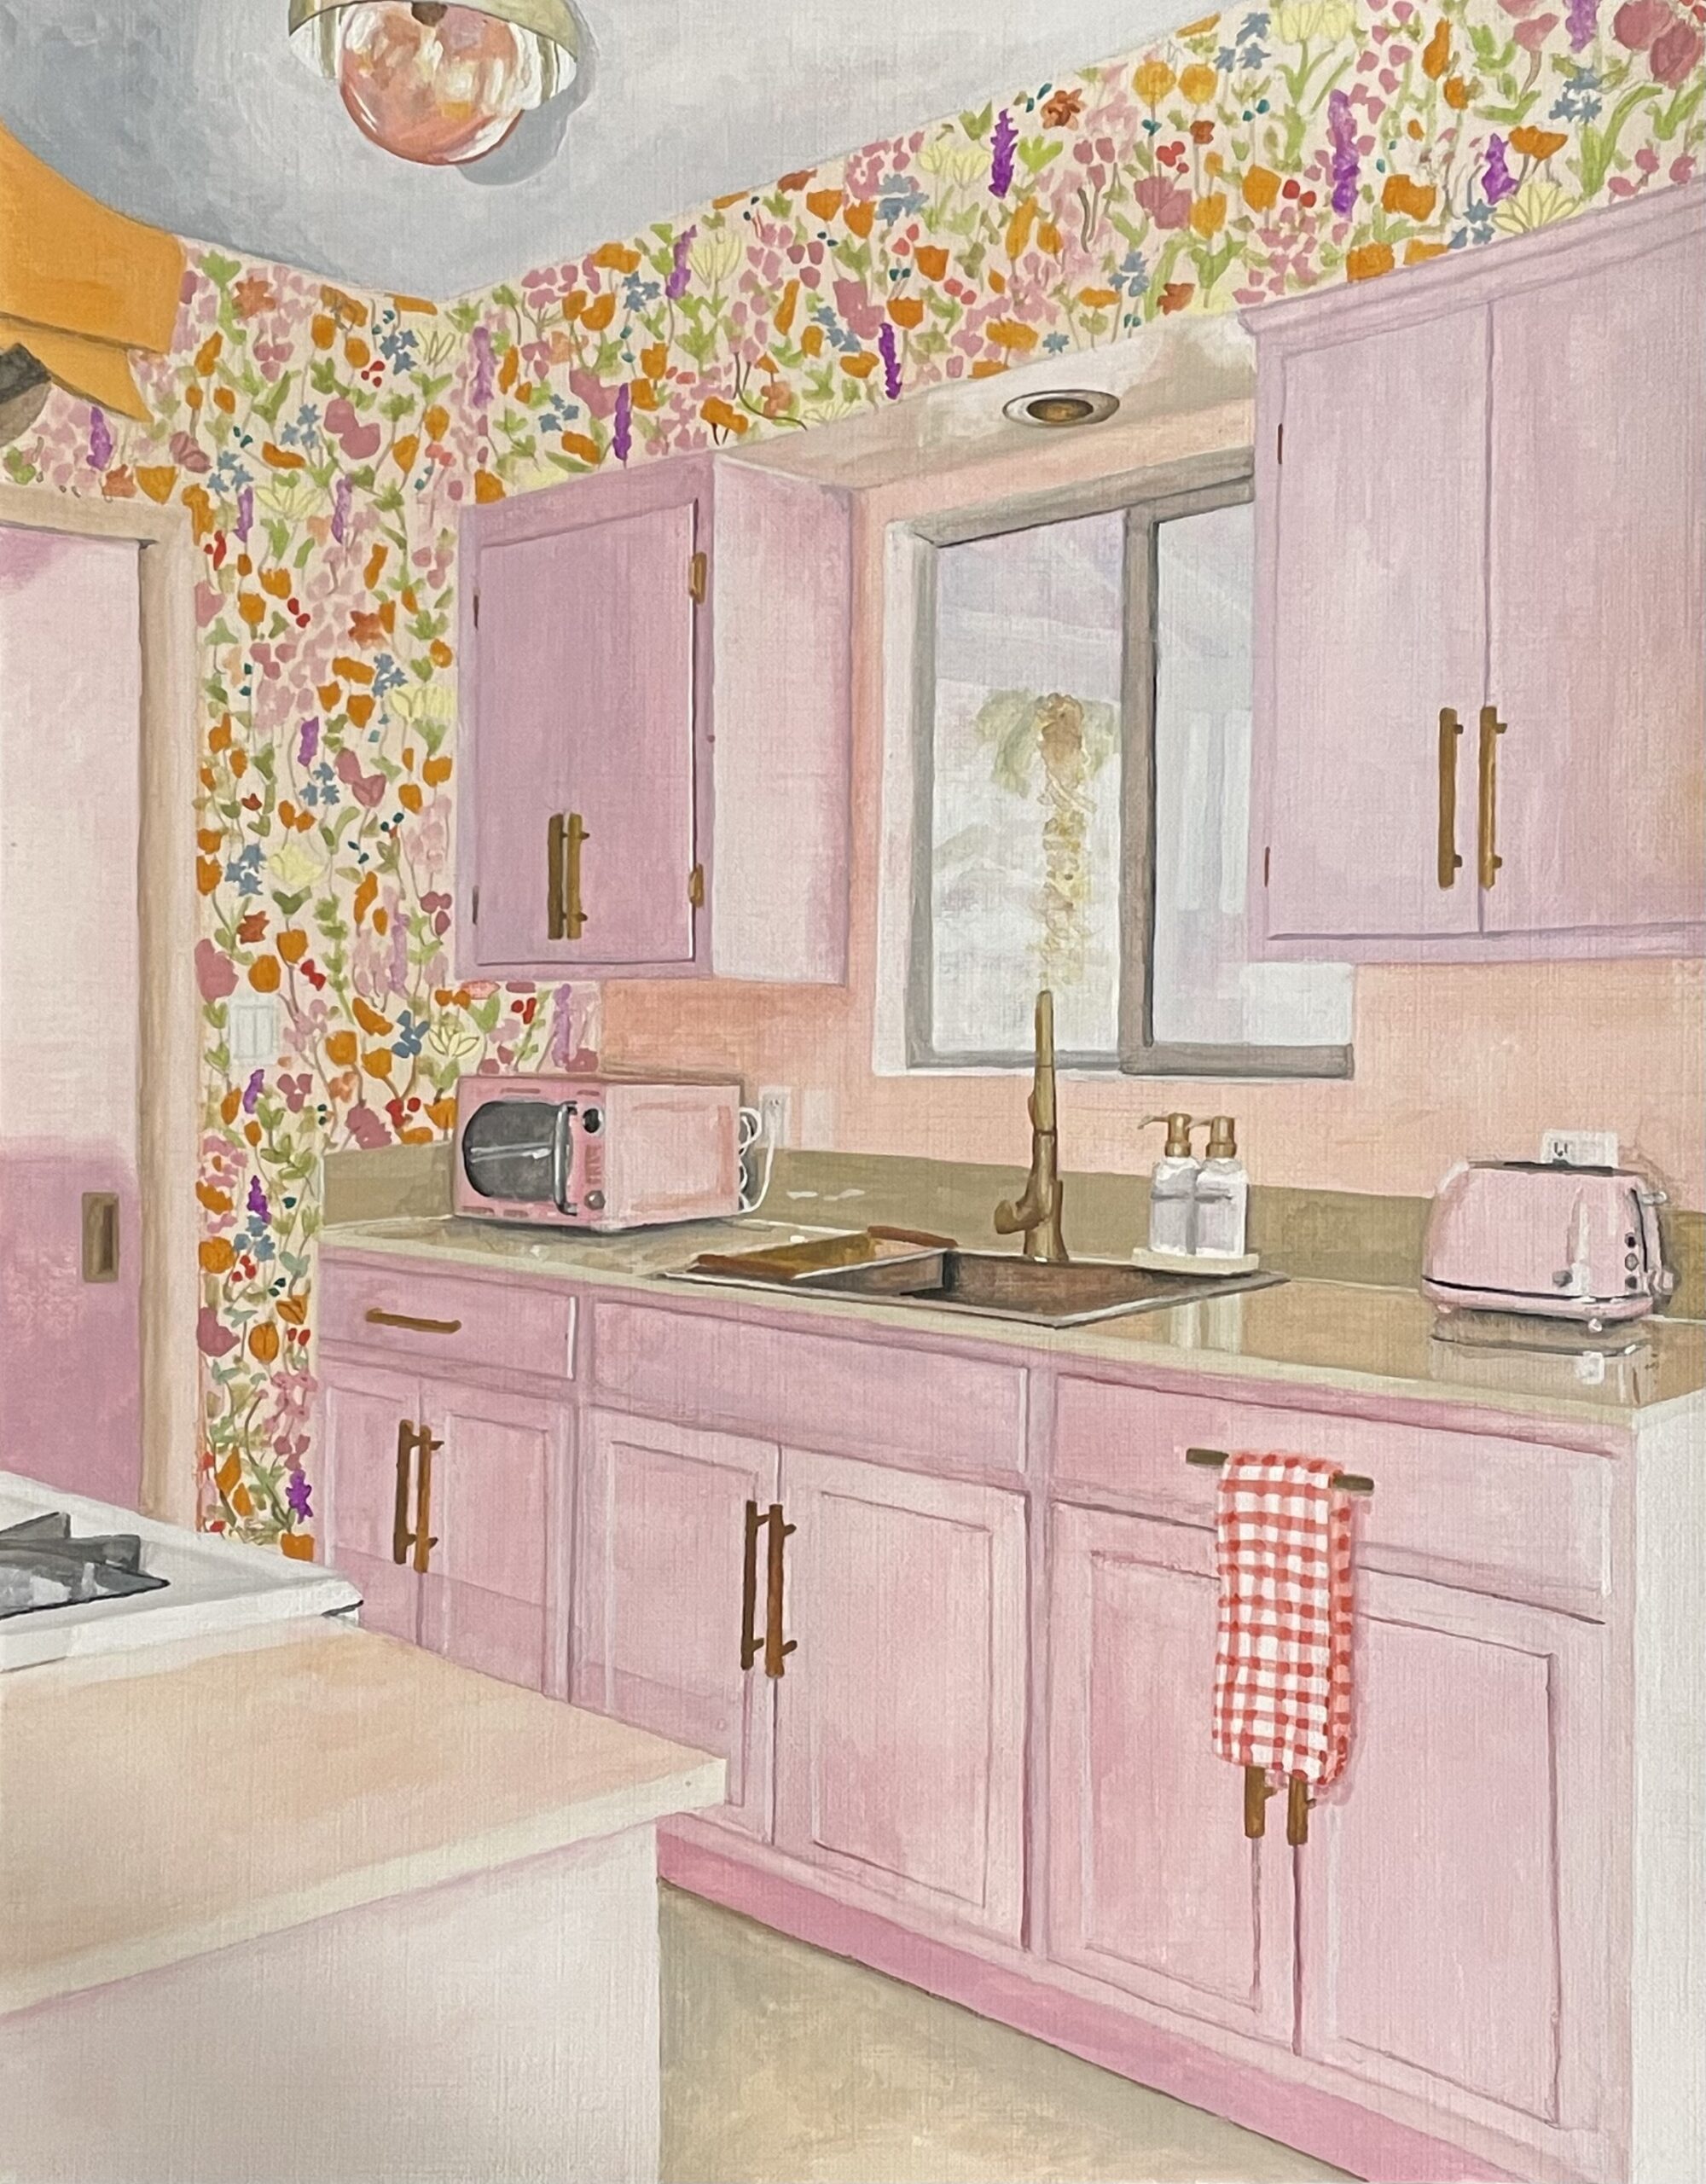 Watercolor painting of a pink kitchen